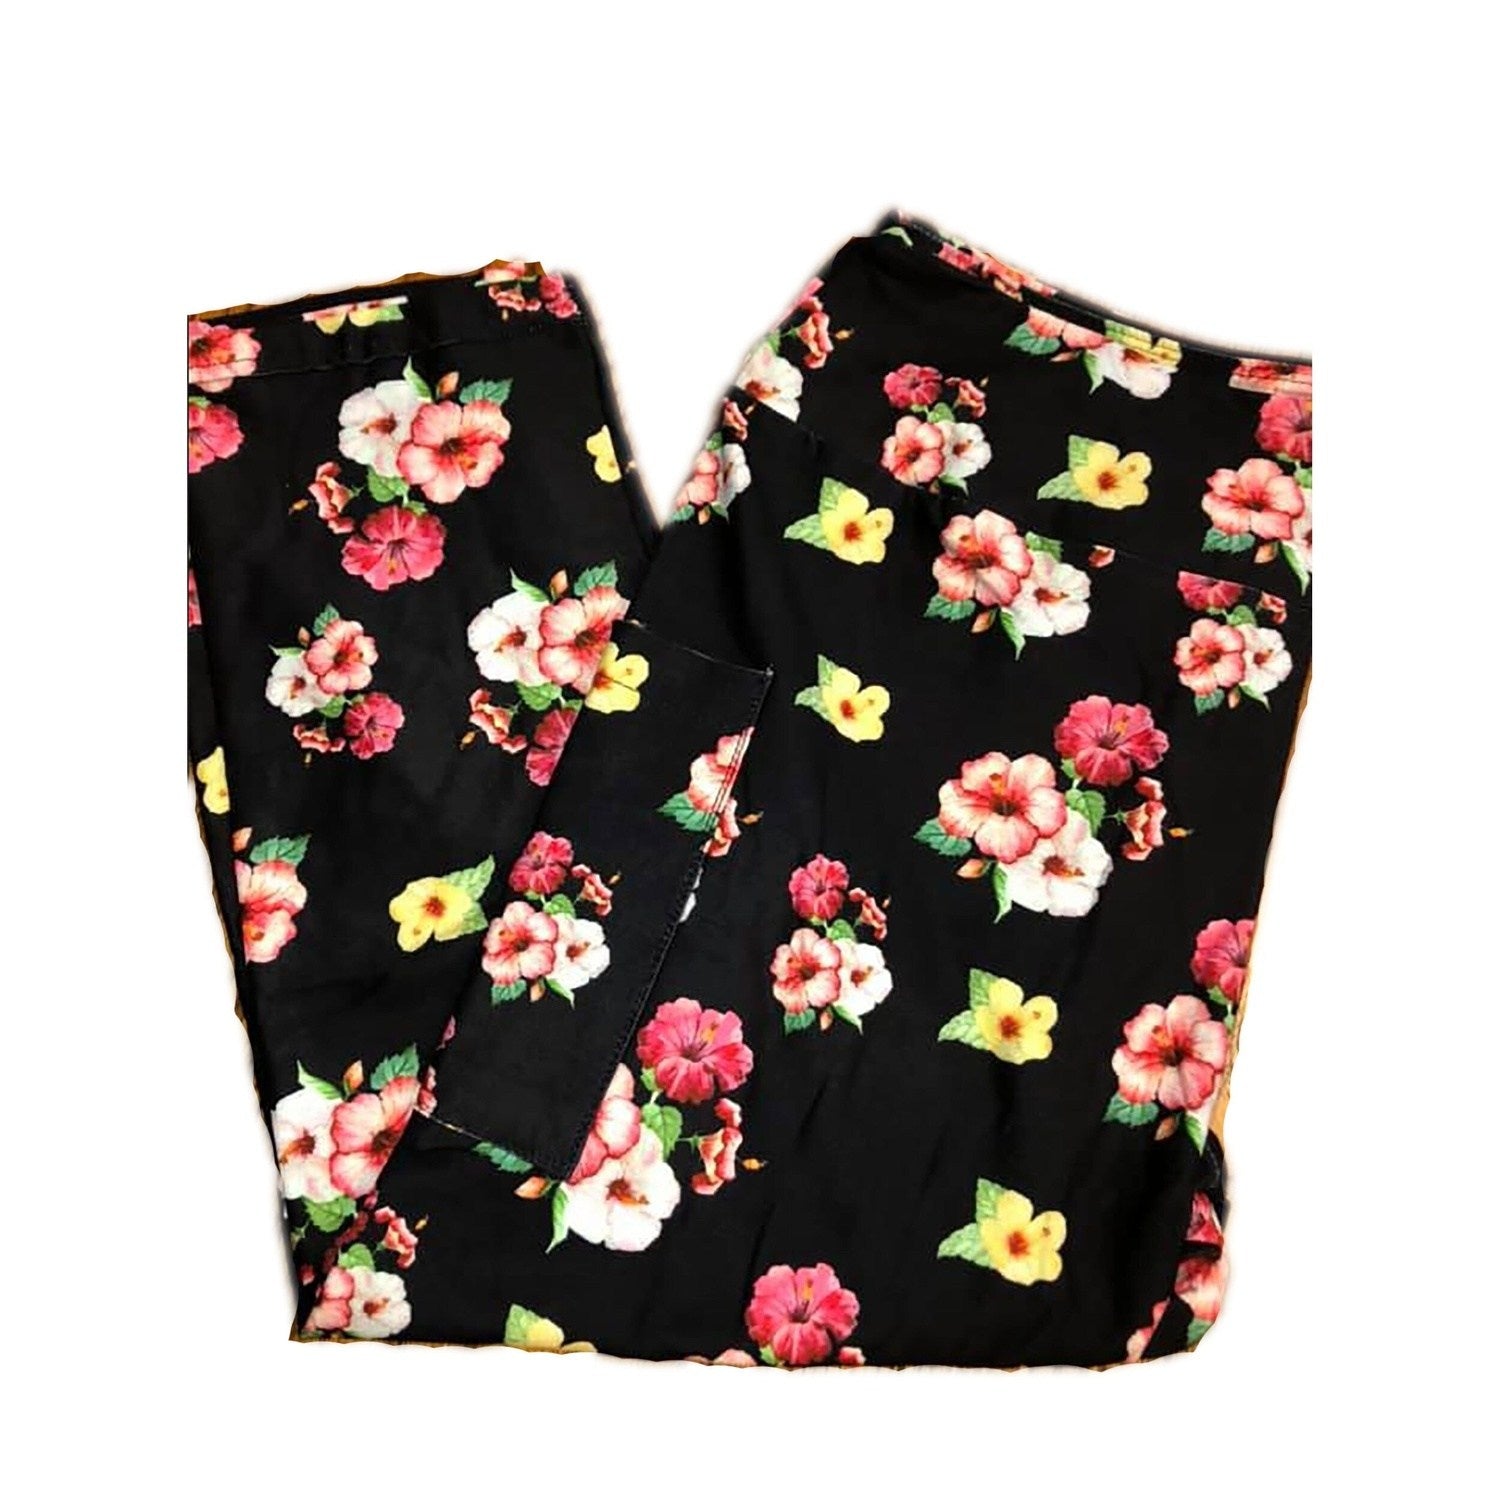 Rose Leggings with Yellow, and Pink Roses on Black Background with Pockets